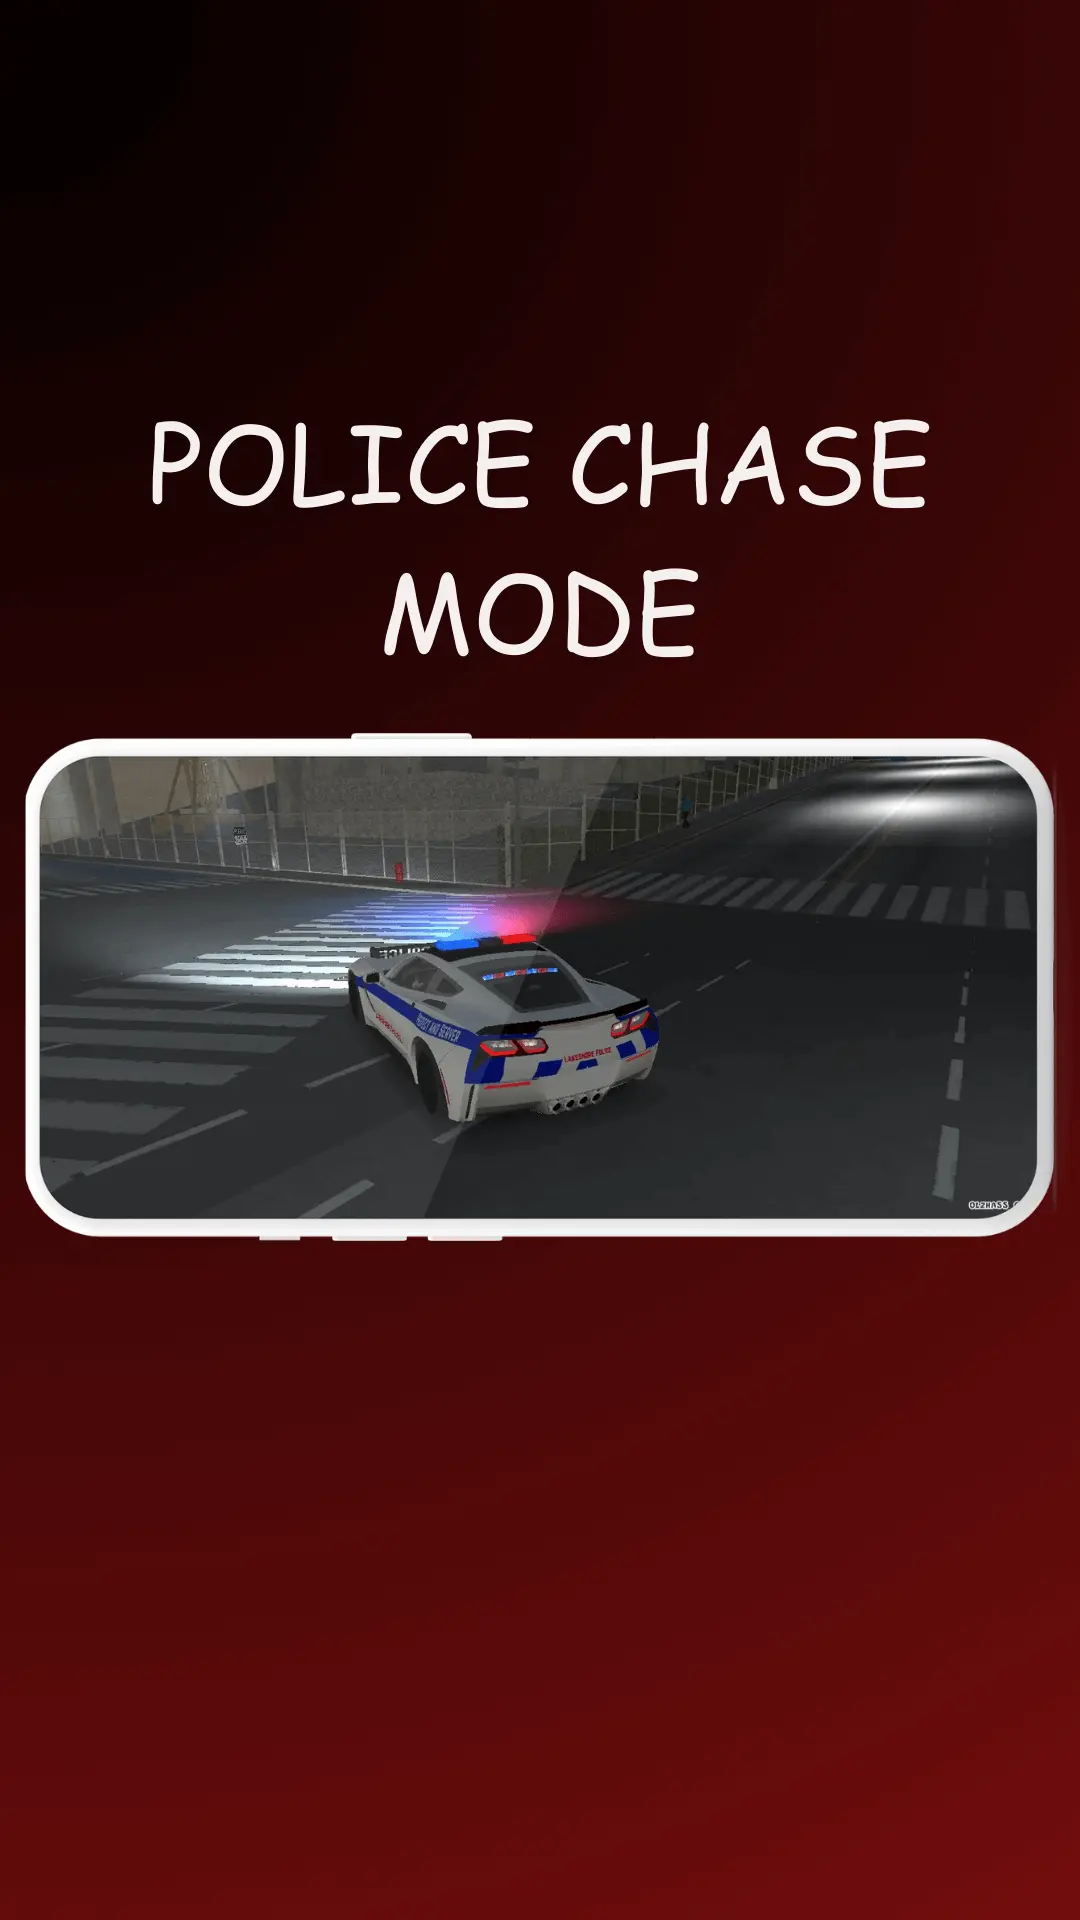 POLICE CHASE MODE